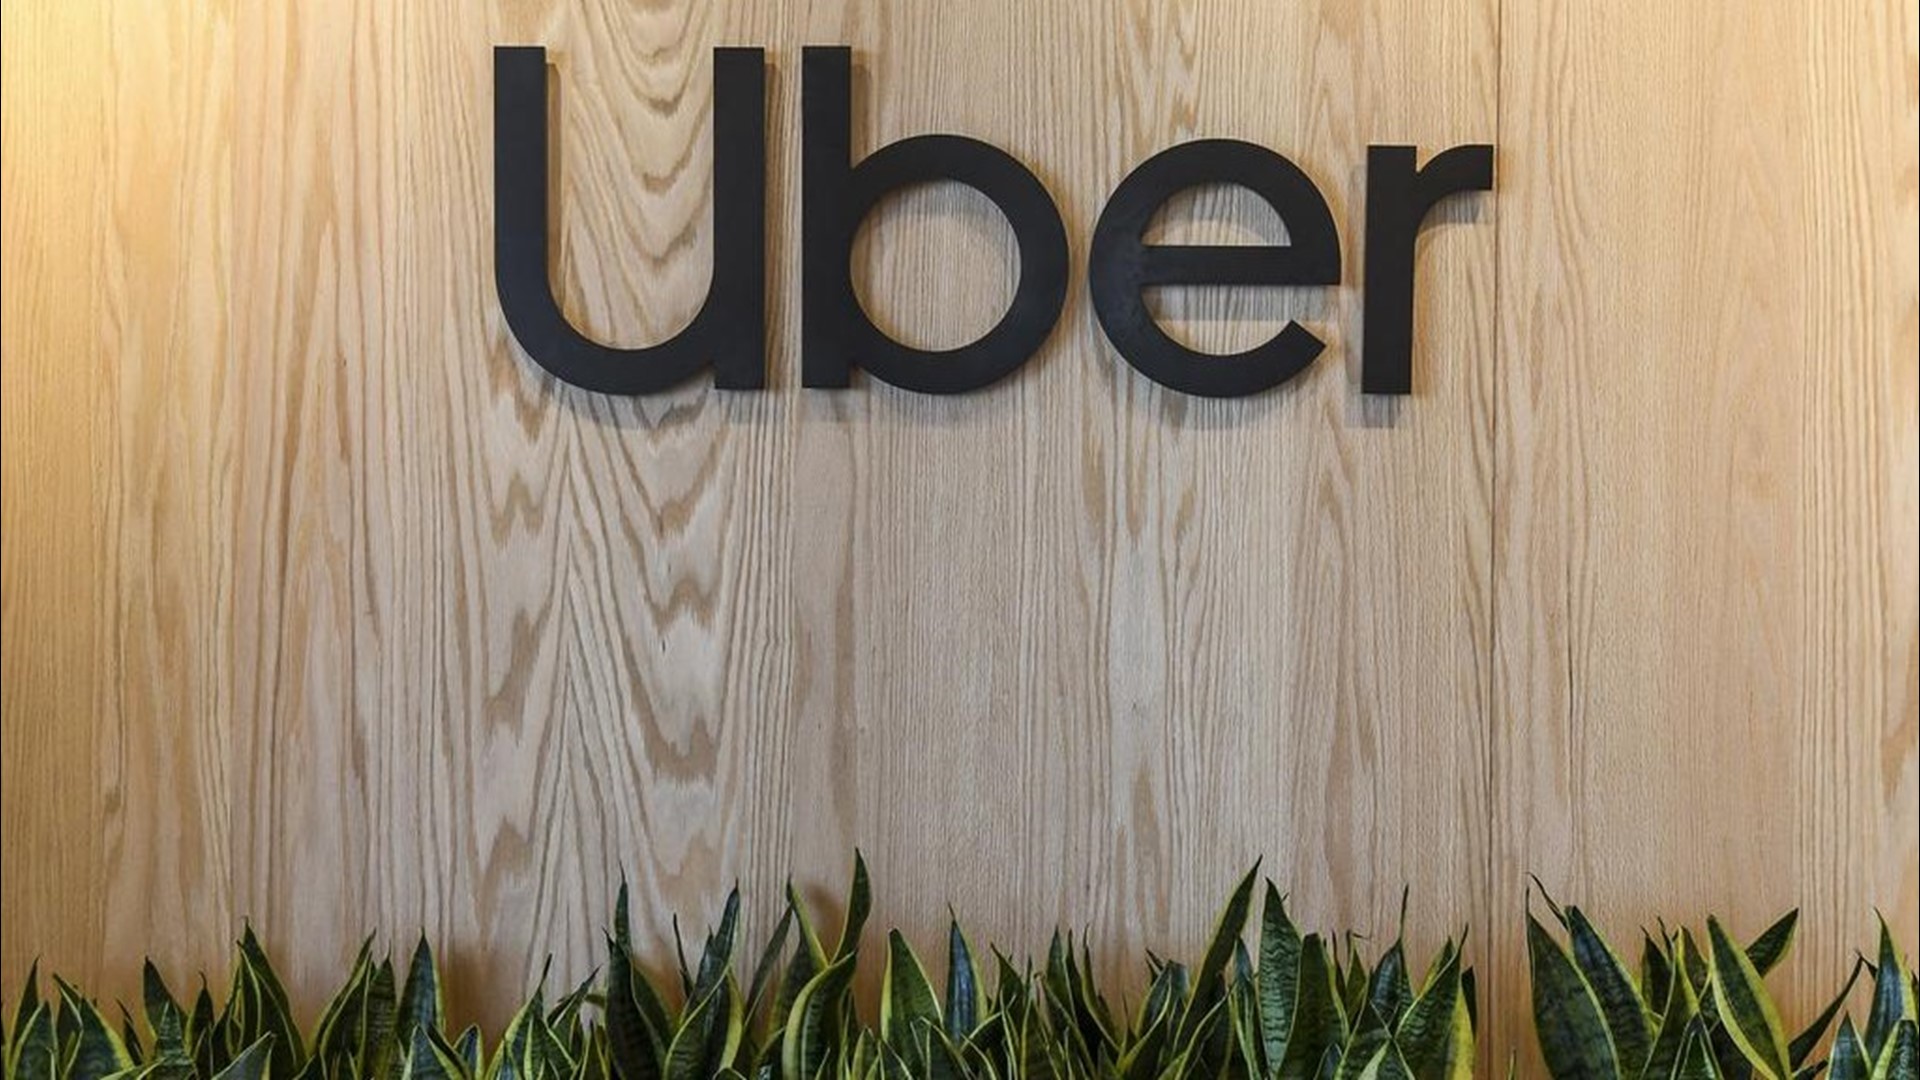 The San Francisco ride-hailing service will reduce its office space plans to 500 employees, according to an Uber spokesperson.